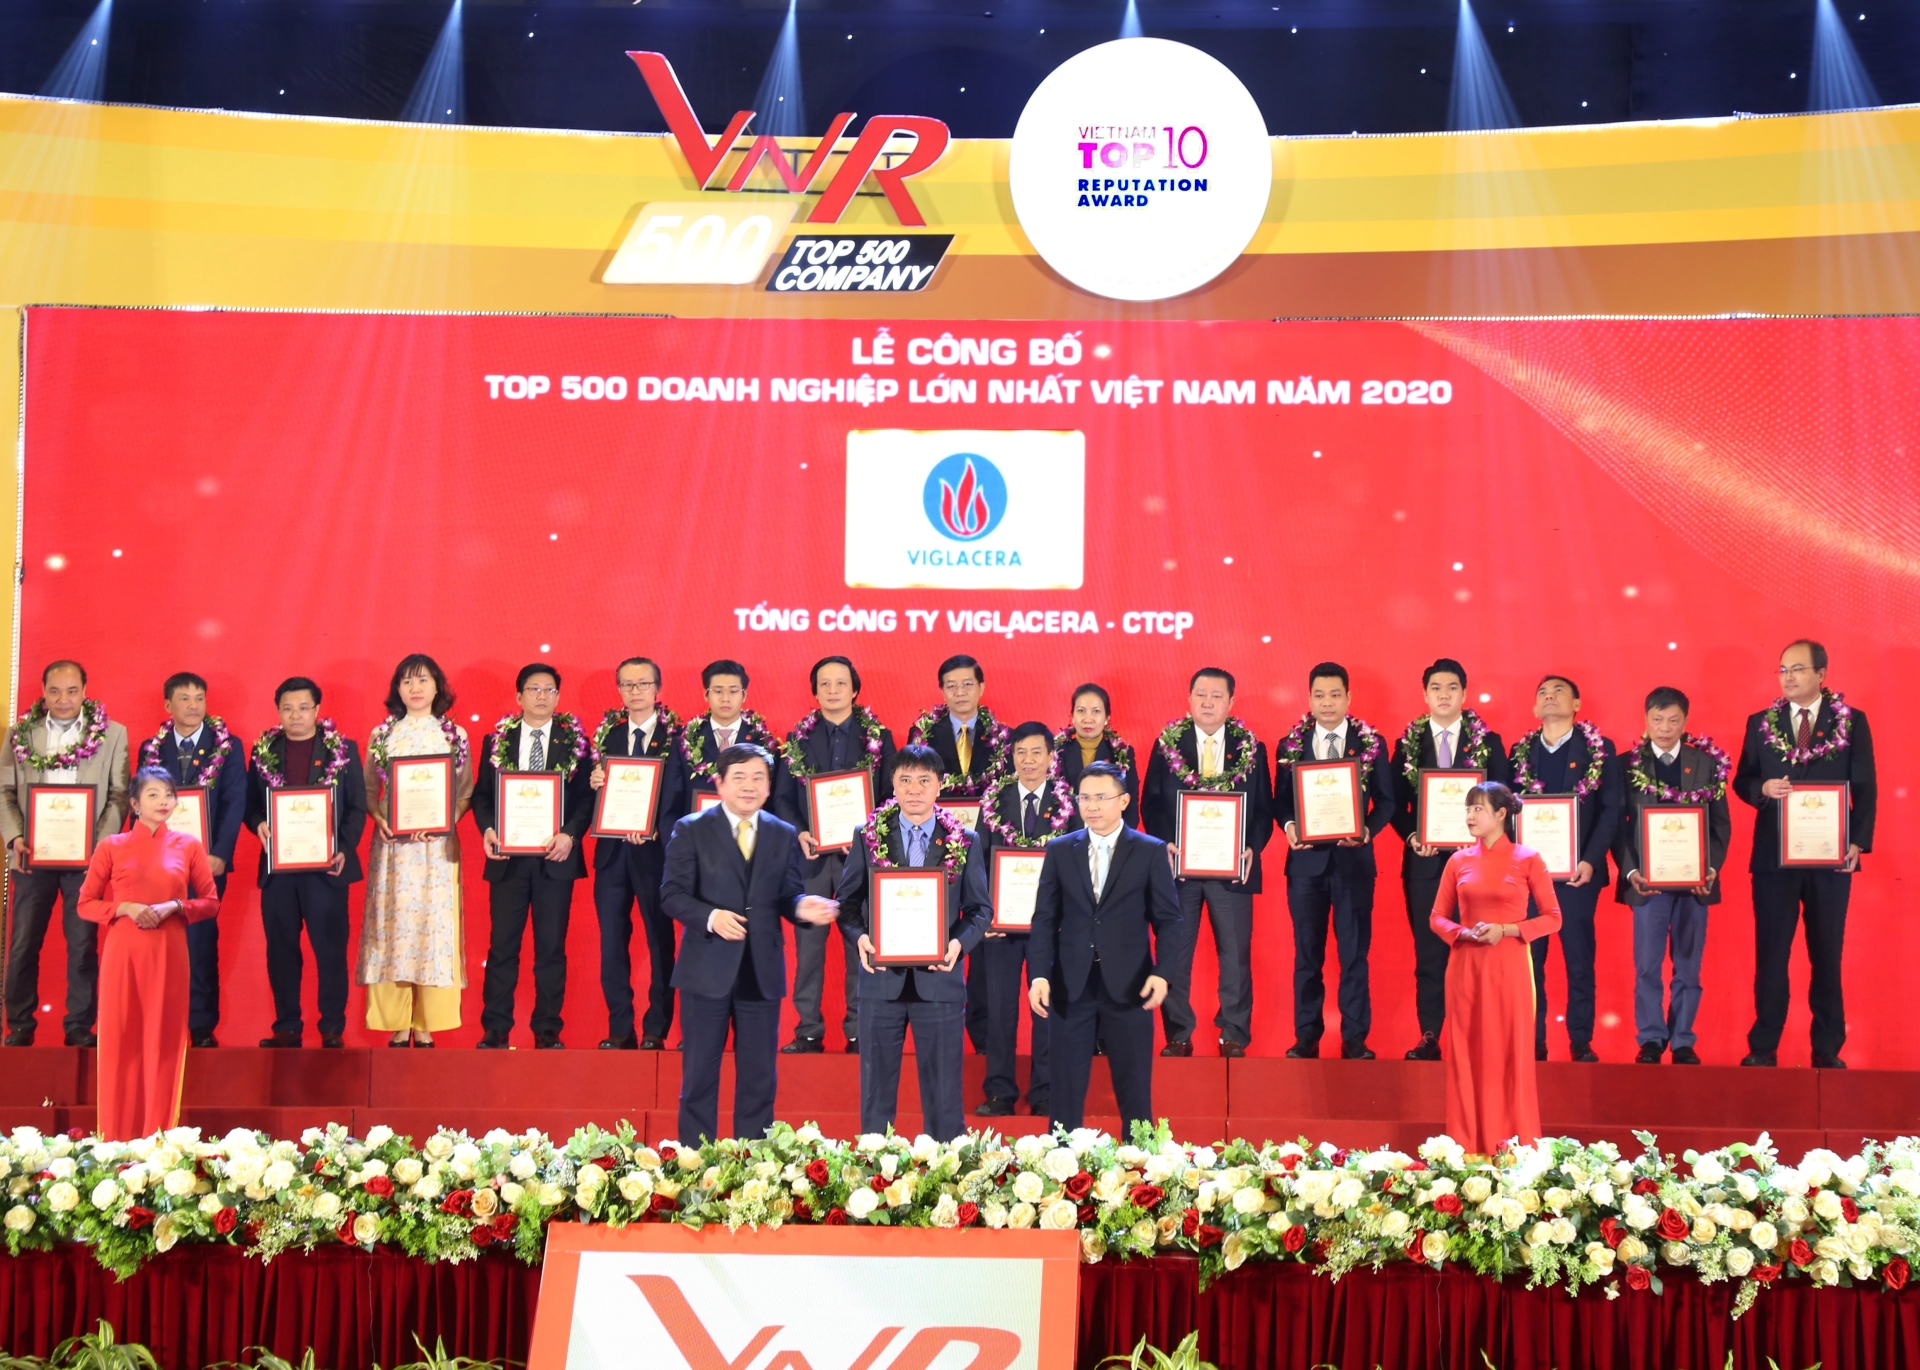 VNR500: Viglacera Corporation - JSC 3 consecutive years holds the leading position in the Top 500 largest enterprises in Vietnam in the construction material manufacturing and trading industry.